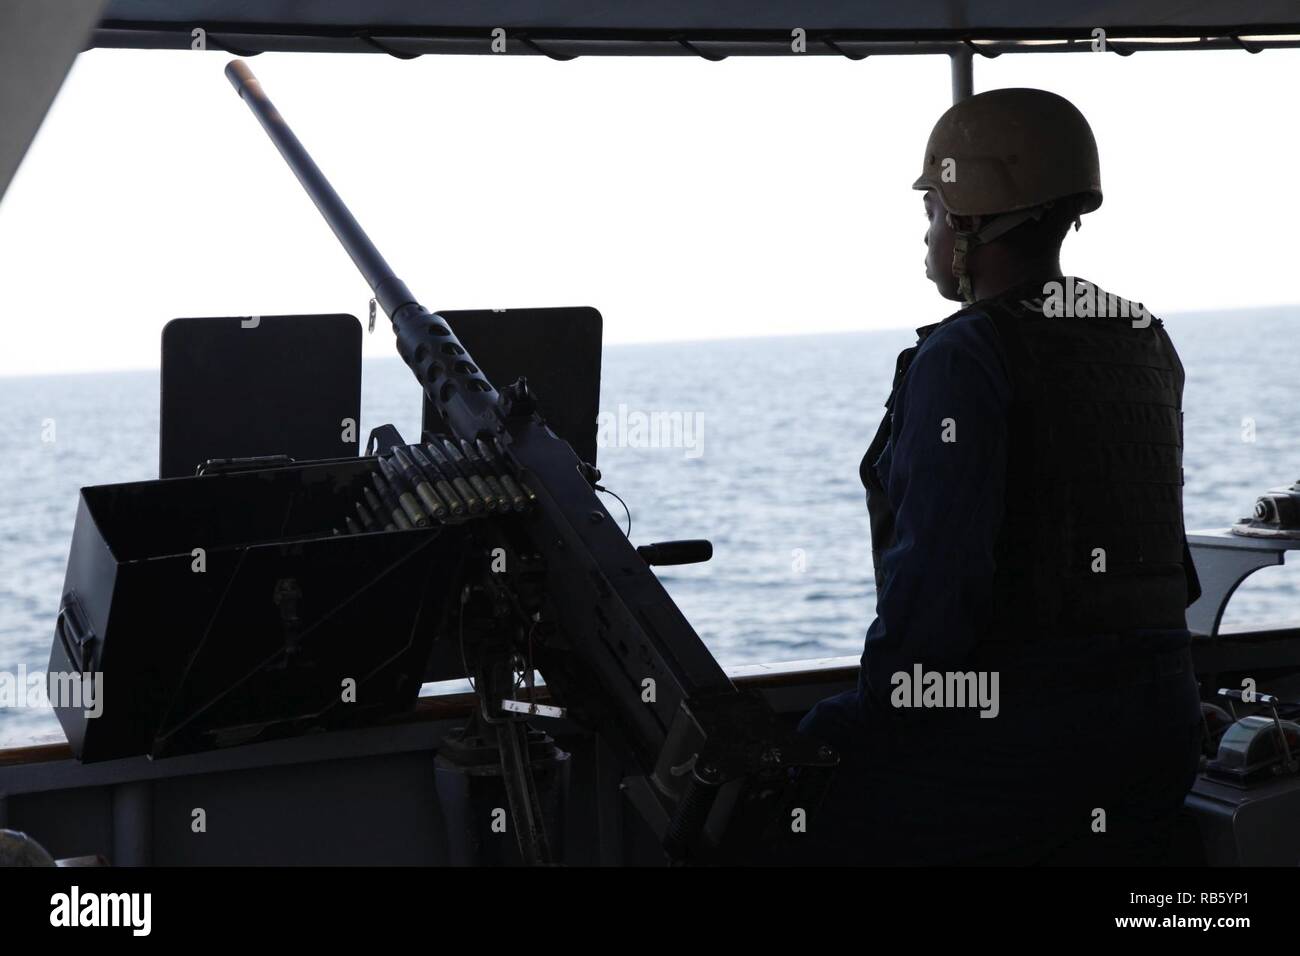 GULF OF OMAN (Dec. 17, 2018) Quartermaster 3rd Class Tresean Phillips stands watch aboard Cyclone-class coastal patrol ship USS Thunderbolt (PC 12) during a maritime patrol in the Gulf of Oman. Thunderbolt is deployed to the U.S. 5th Fleet area of operations in support of naval operations to ensure maritime stability and security in the Central Region, connecting the Mediterranean and the Pacific through the western Indian ocean and the three strategic choke points. Stock Photo